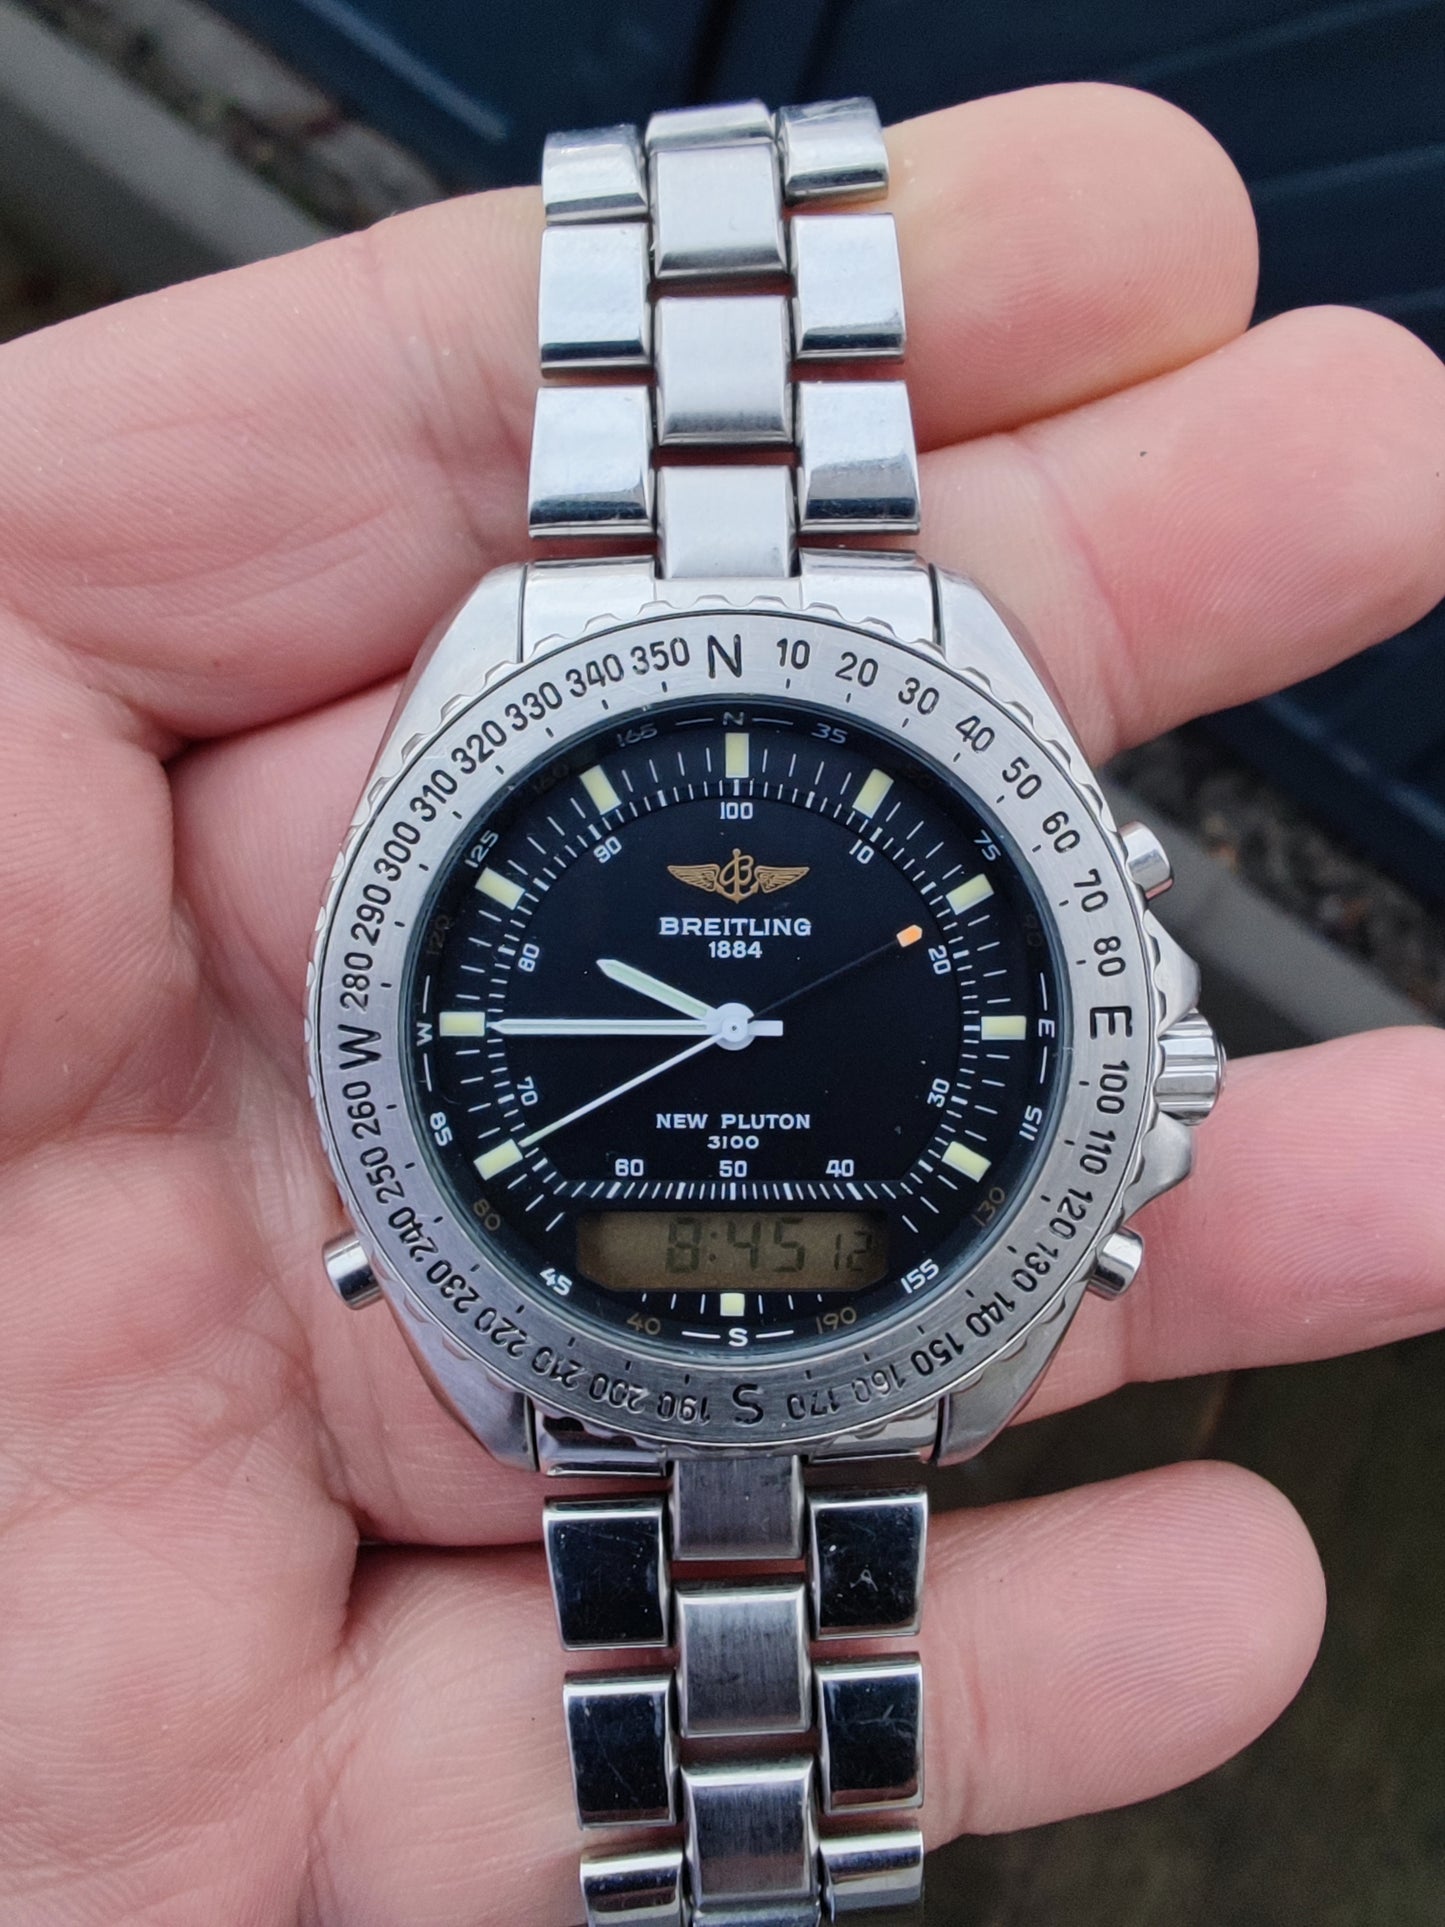 Perfect Breitling NEW PLUTON 1884 SERVICE JAN-2024